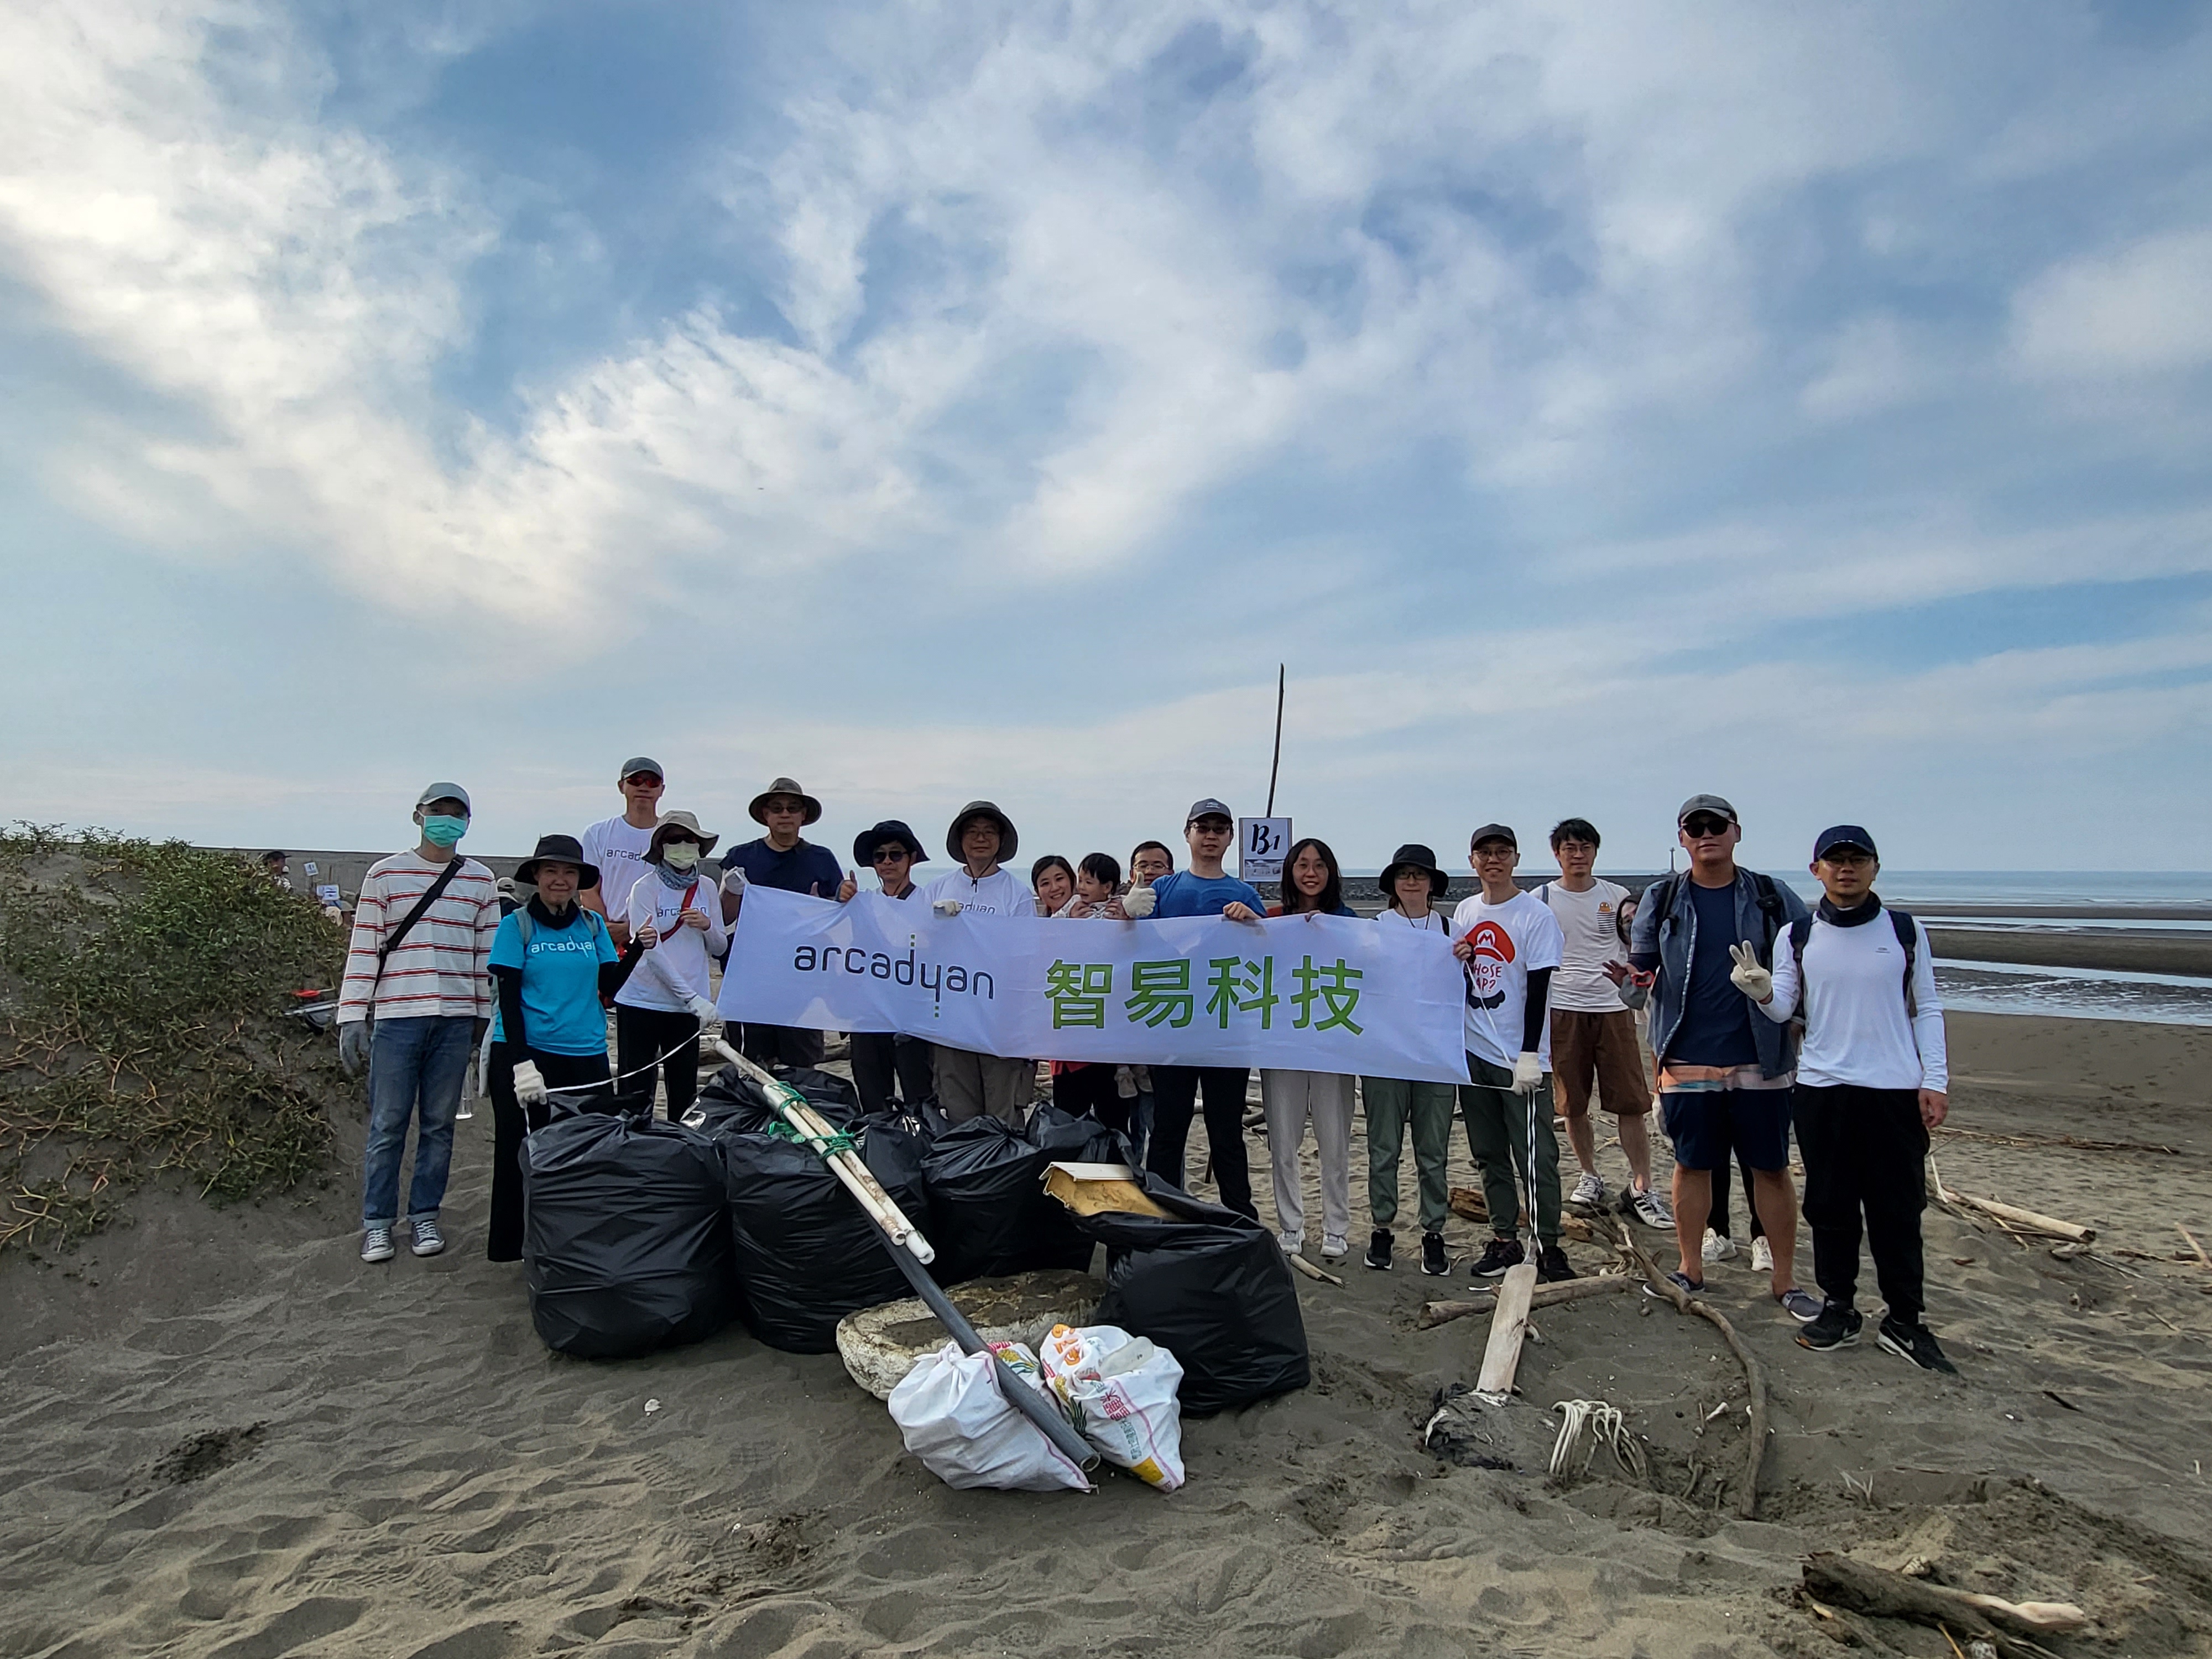 Arcadyan marks International Coastal Cleanup Day by collecting 2,300 kg of marine waste.